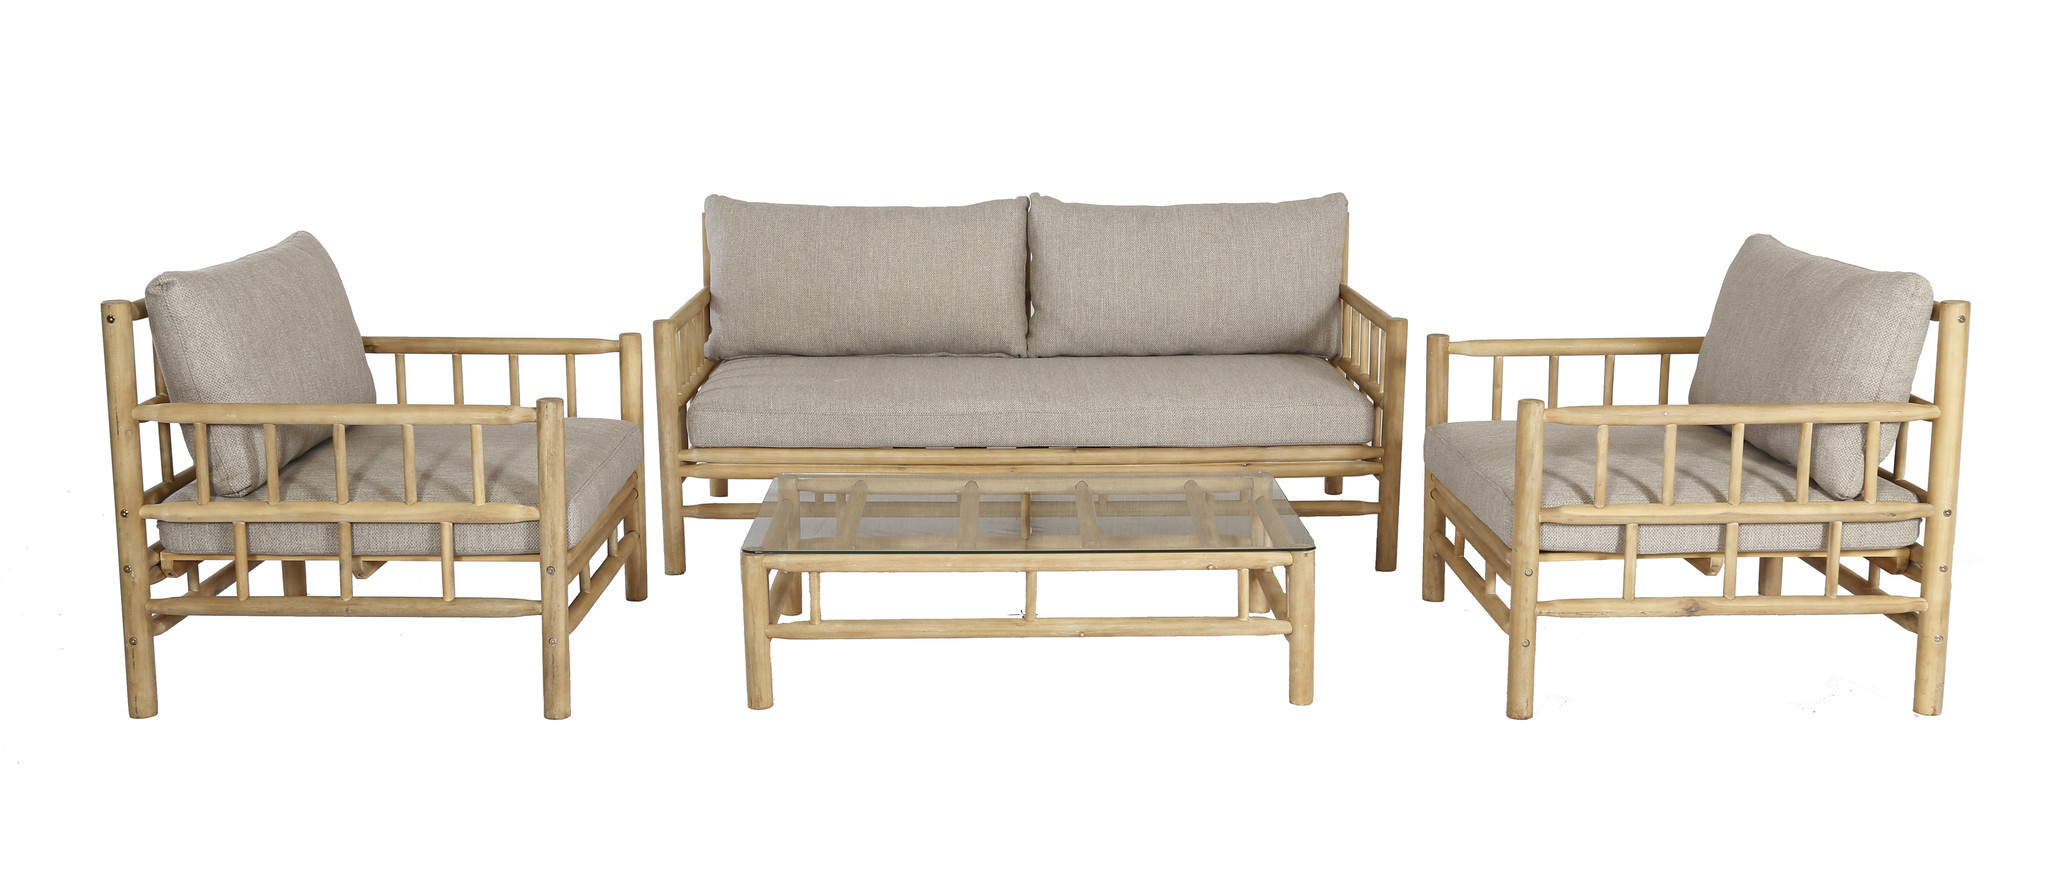 De Outsider Loungeset Costa Rica Bamboo Look Acaciahout